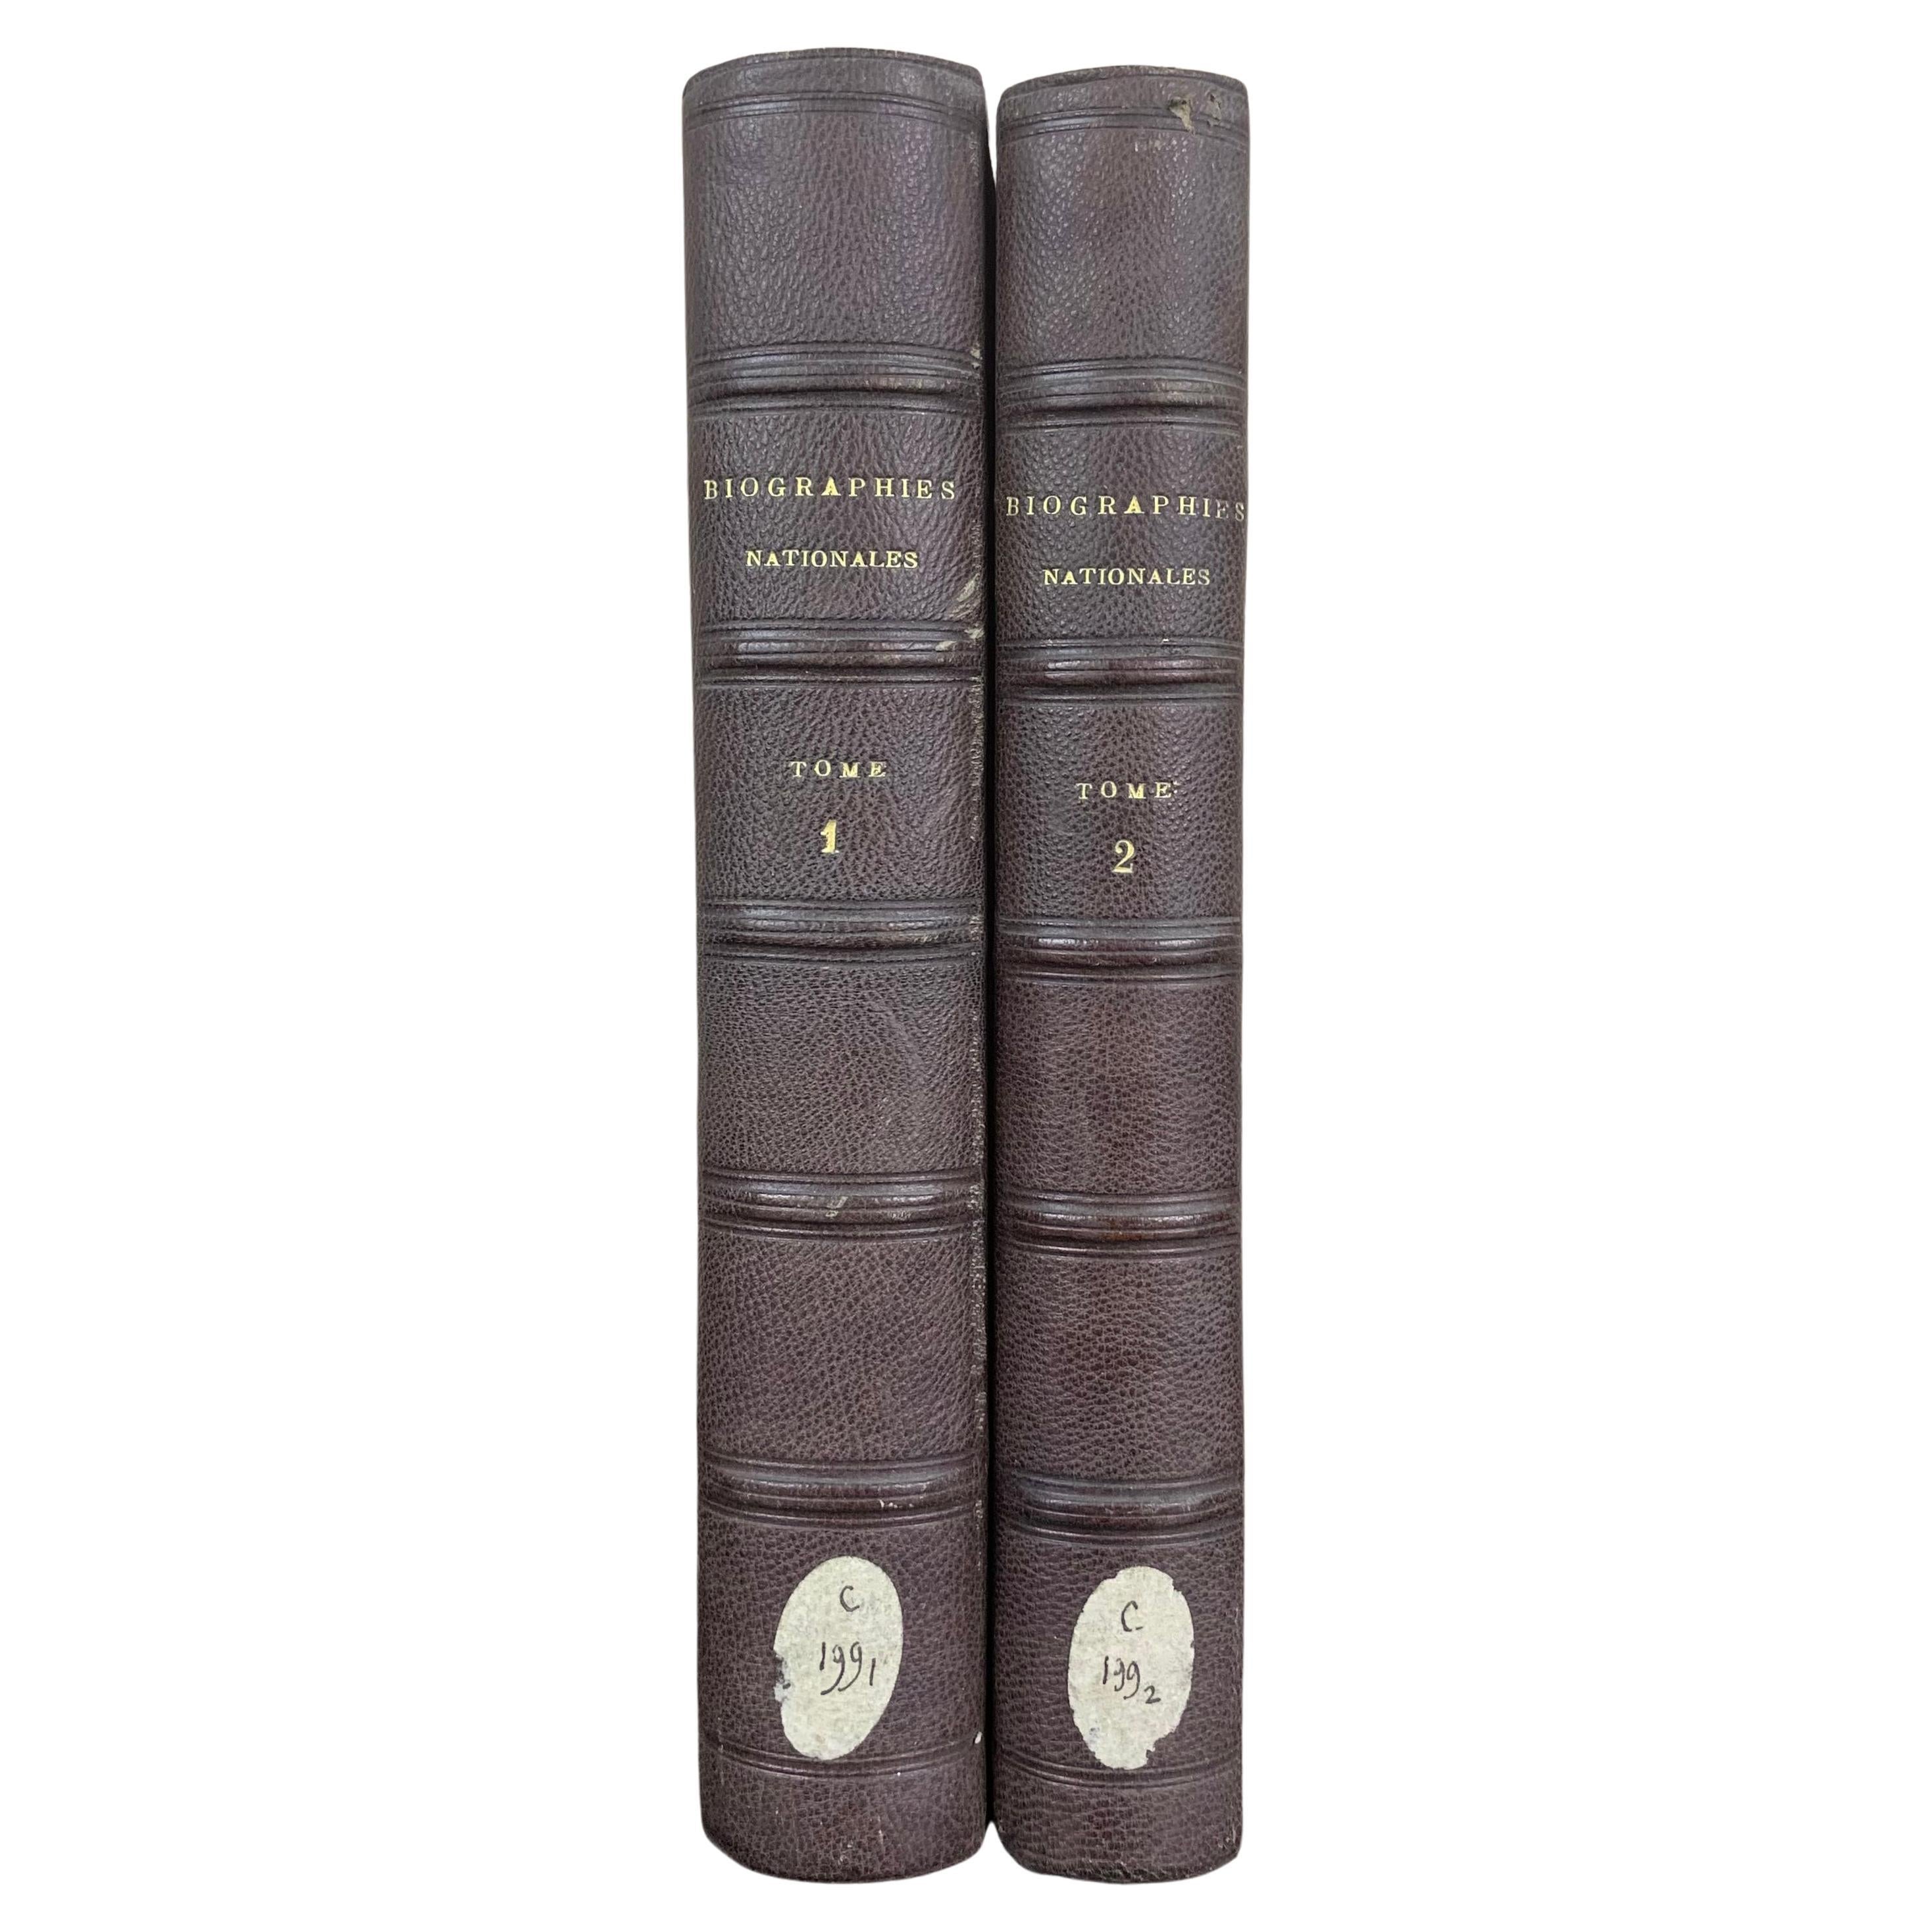 Pair of Old Books « National Biographies » from the 19th Century France  For Sale